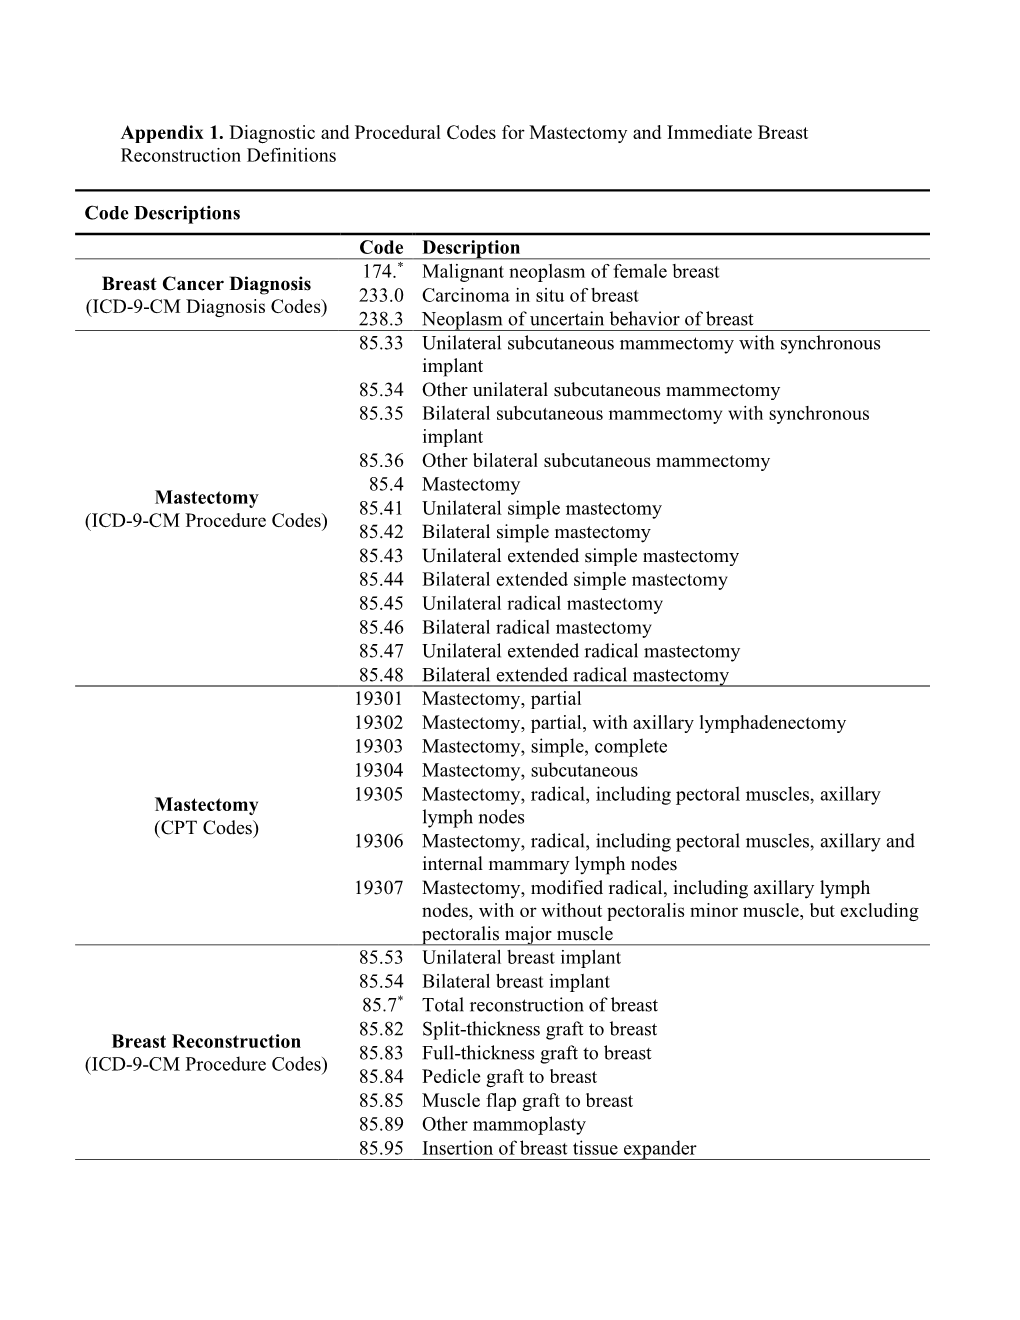 Appendix 1. Diagnostic and Procedural Codes for Mastectomy and Immediate Breast Reconstruction Definitions